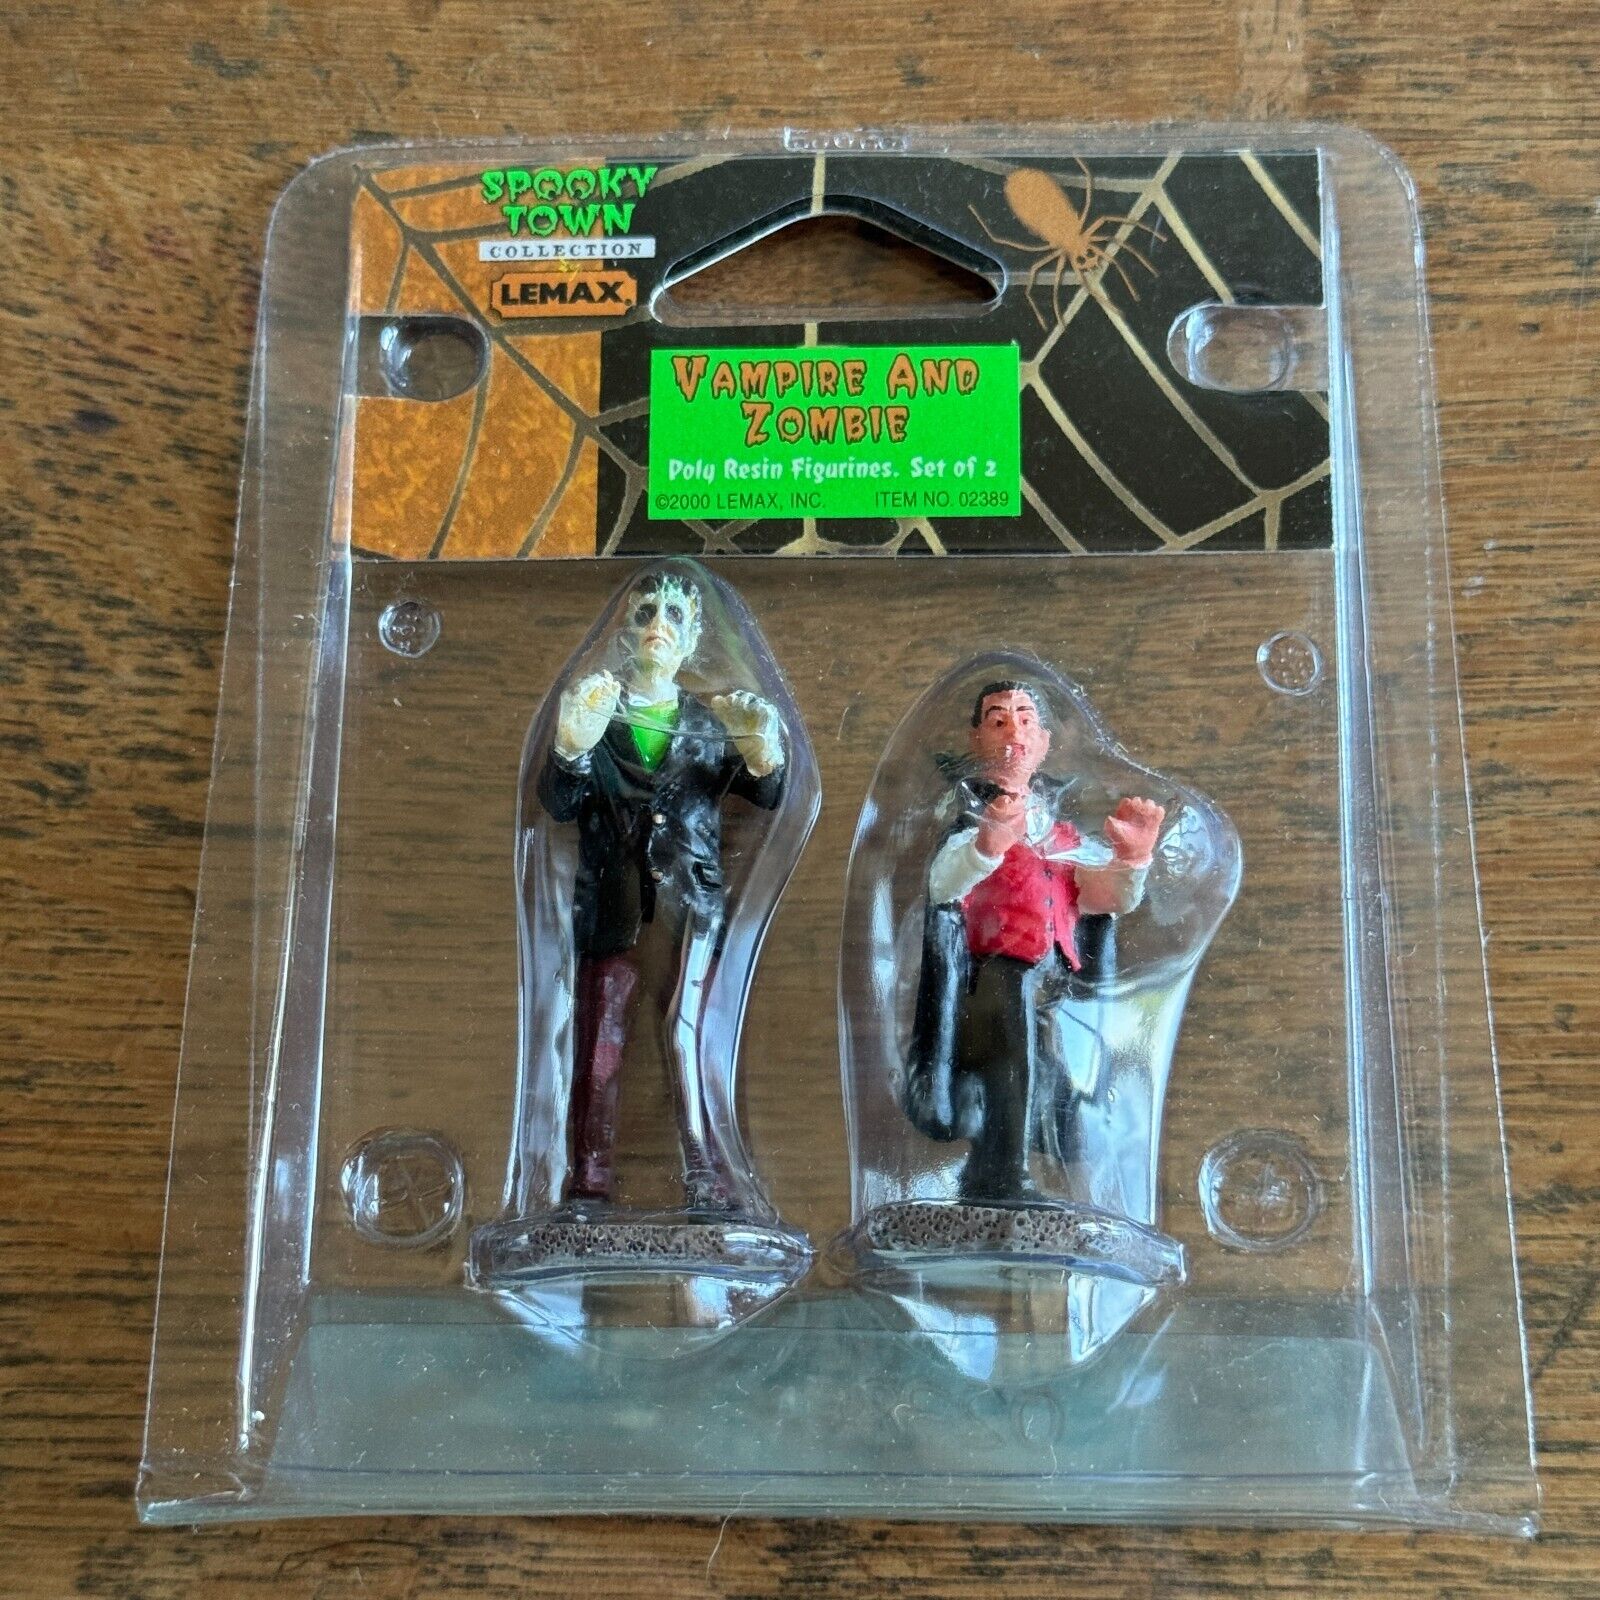 New Lemax Vampire And Zombie Spooky Town Collection Vintage Halloween Accessory